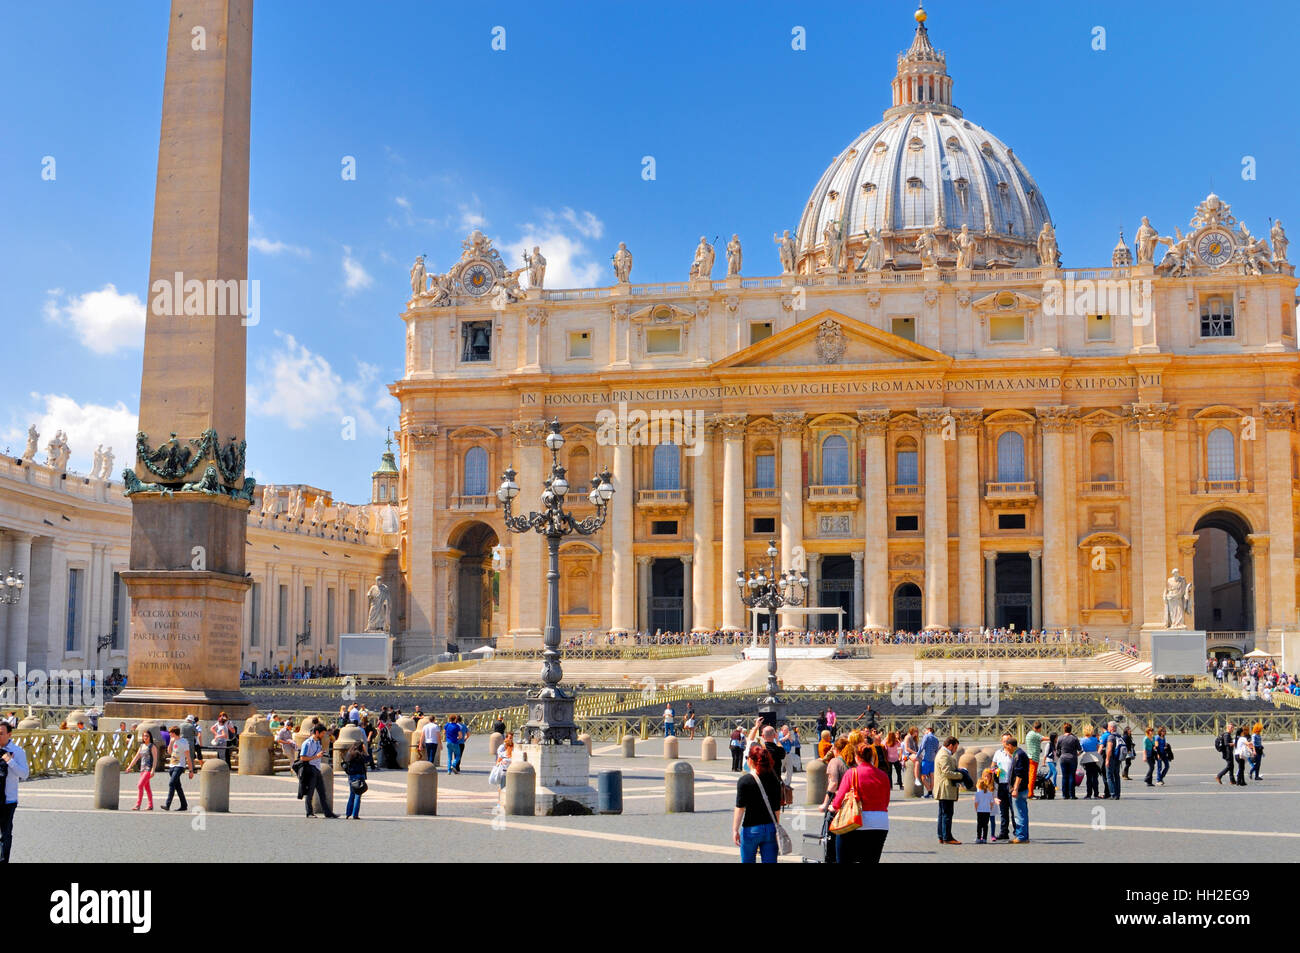 St Peter's Basilica, crowded with tourists and pilgrims, unidentified, from all over the world. April 13, 2013 in Rome, Italy. Stock Photo